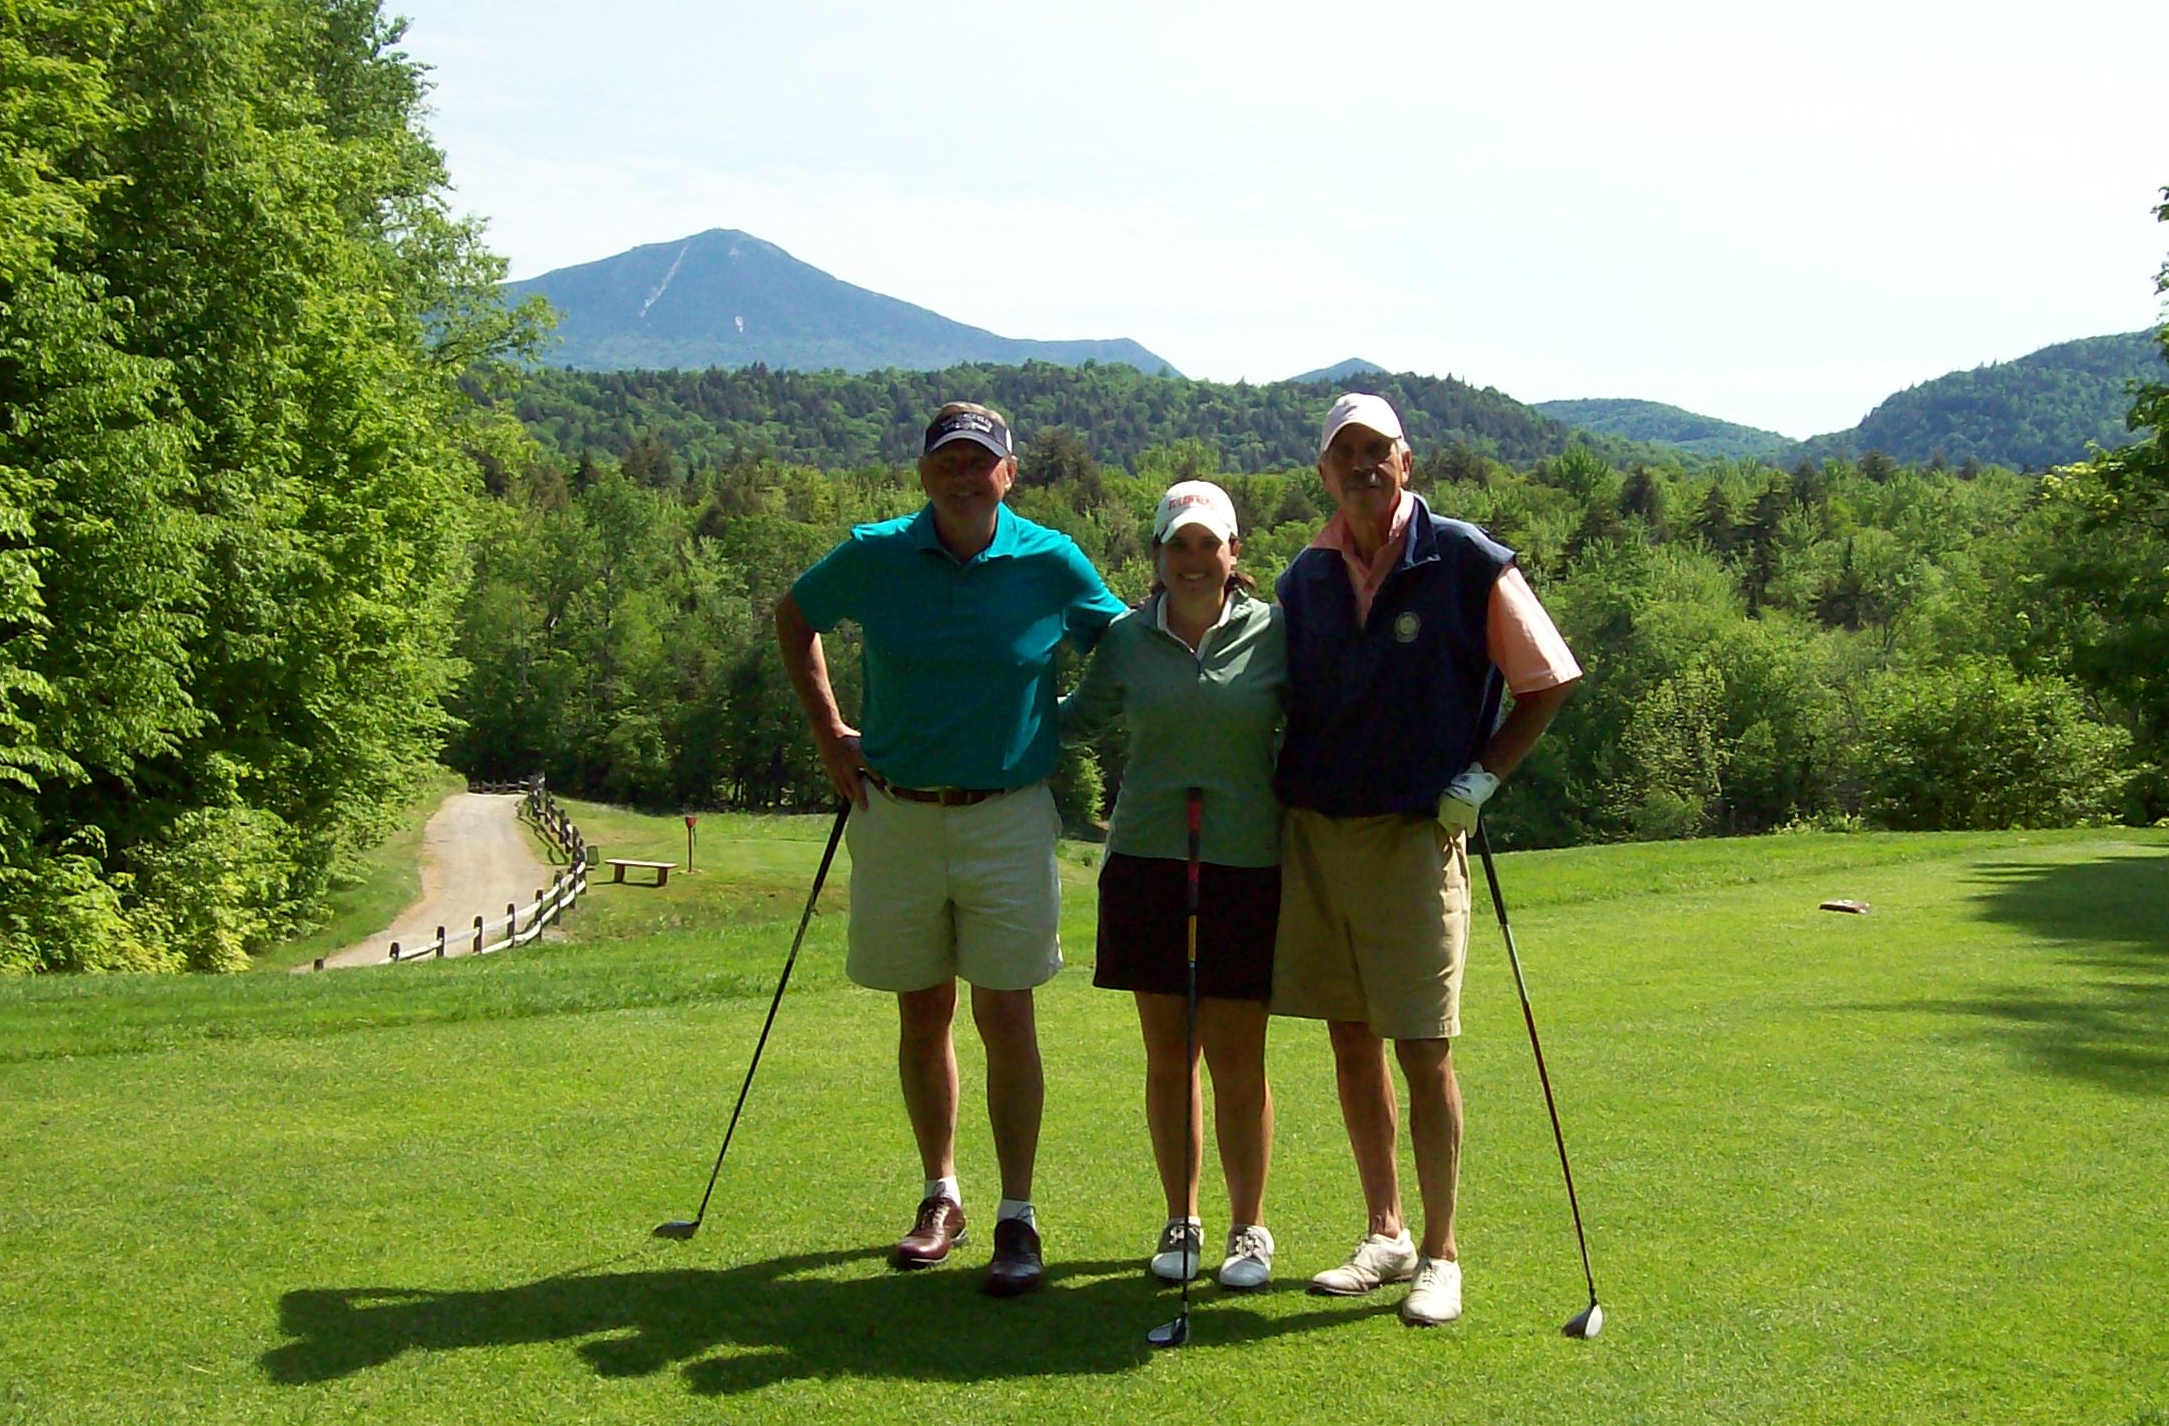 The view of Whiteface Mountain from the 6th tee.